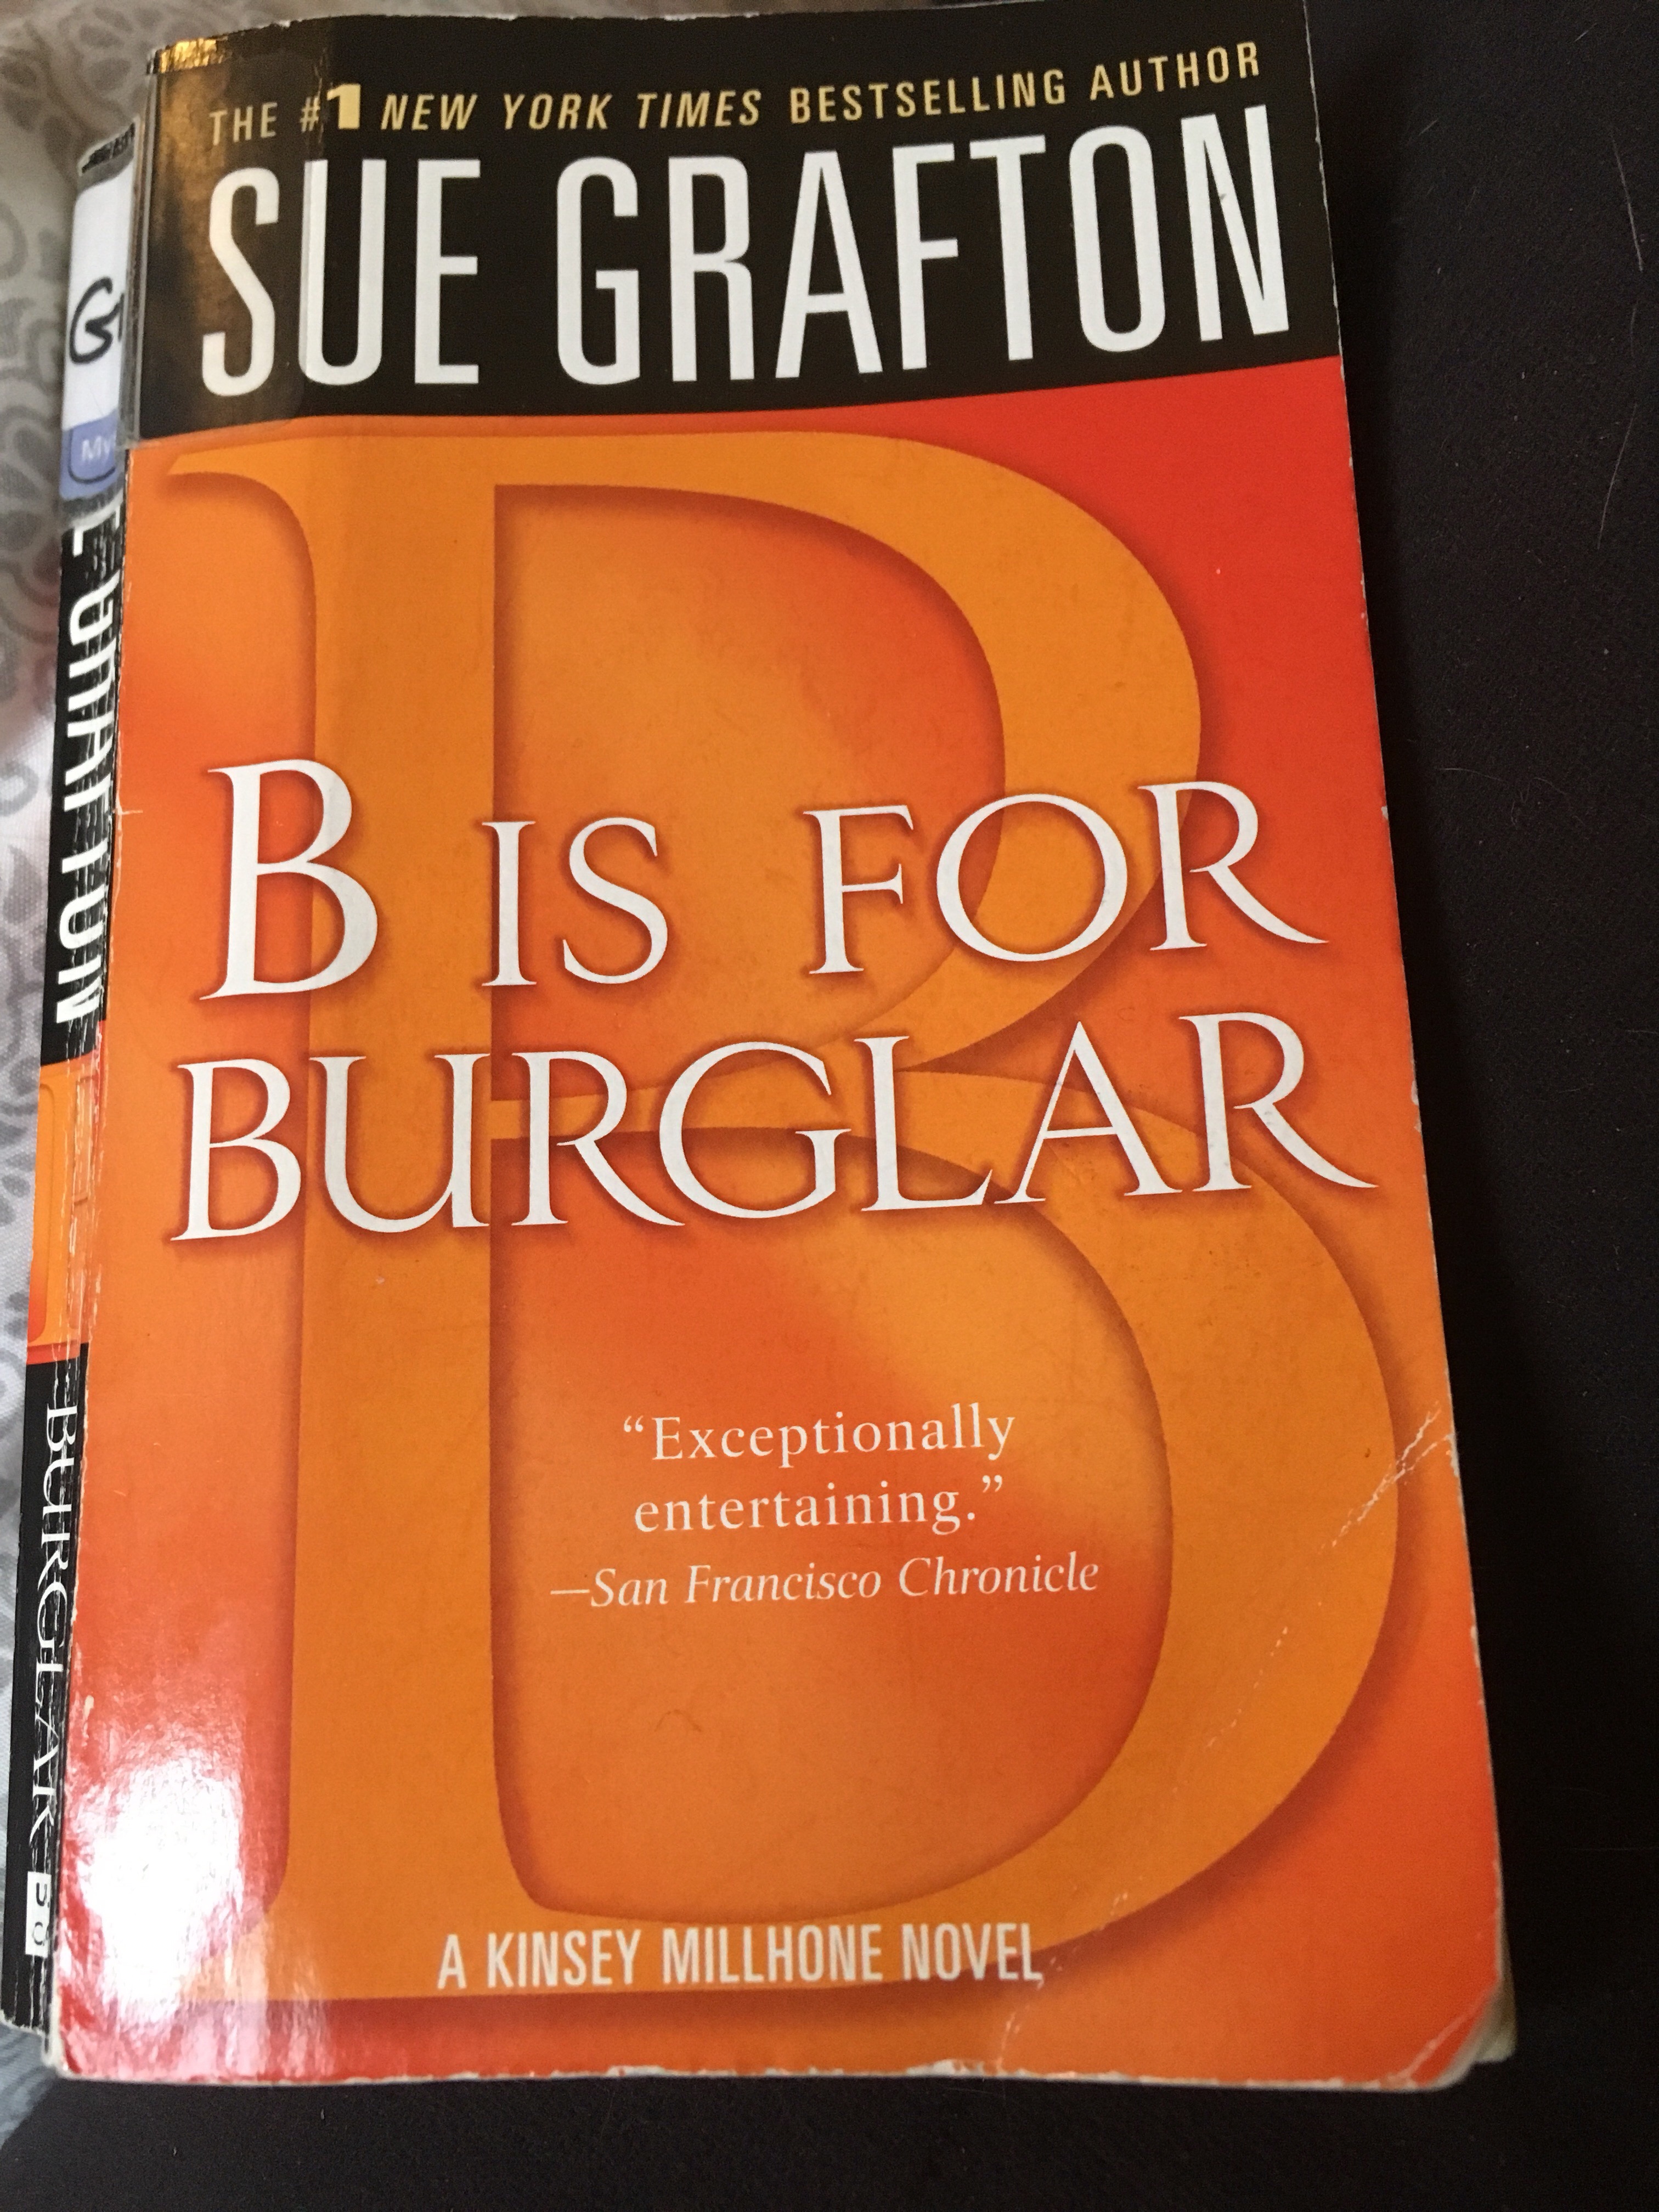 B is for burglar by Sue Grafton book cover